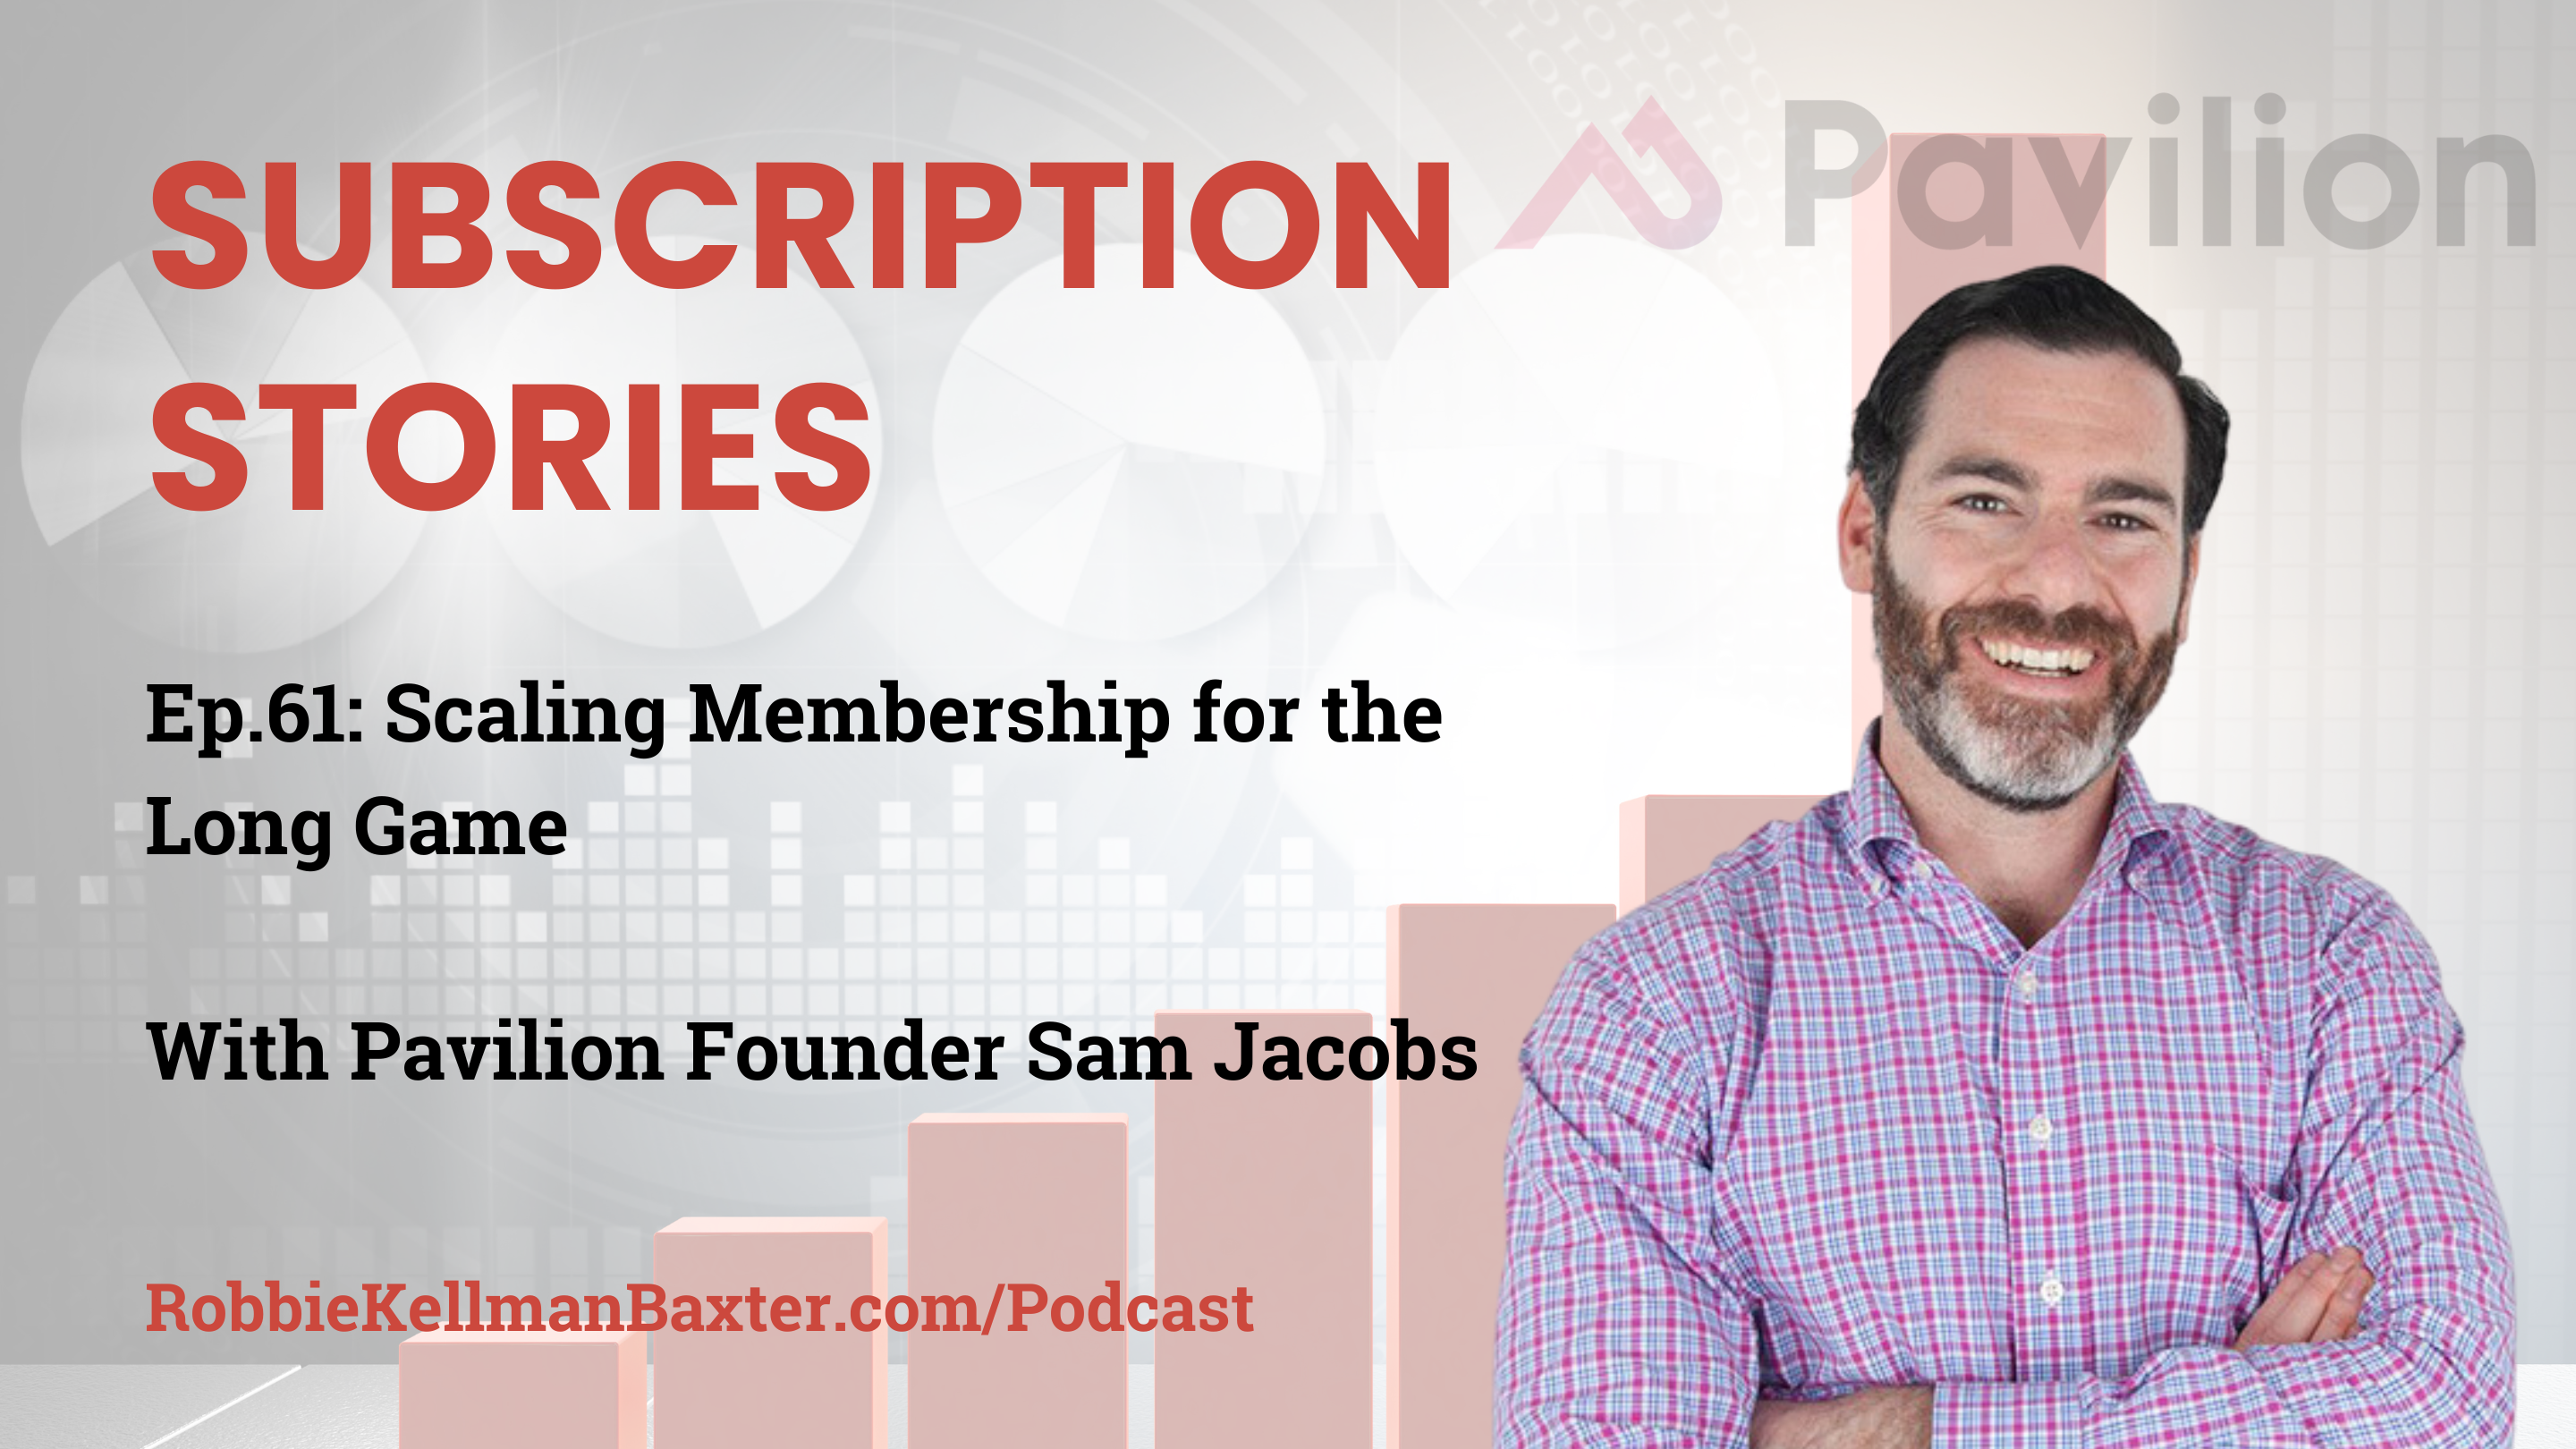 Scaling Membership for the Long Game with Pavilion Founder Sam Jacobs